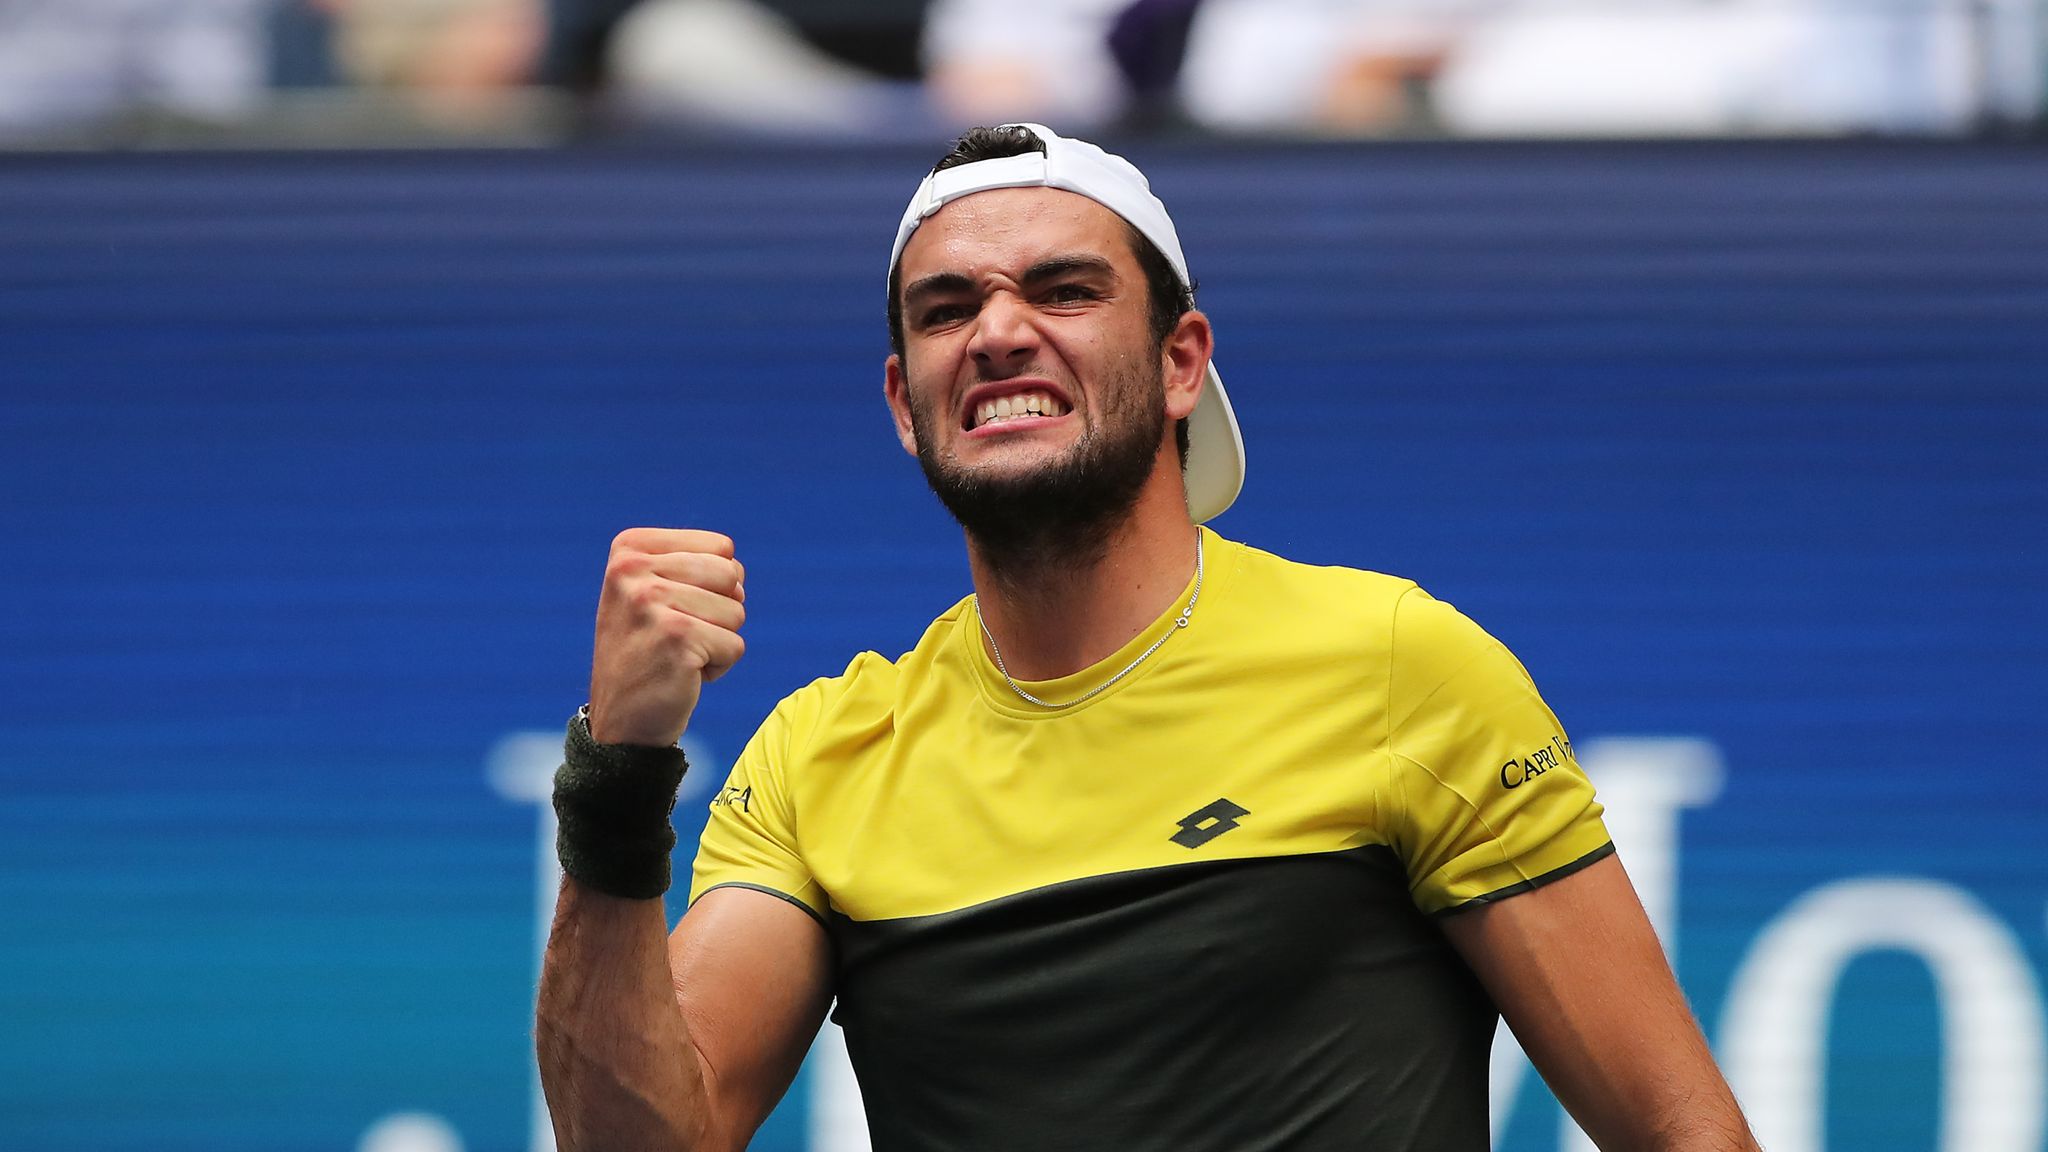 Matteo Berrettini beats Gael Monfils in five thrilling sets at the US Open to reach semi-finals Tennis News Sky Sports